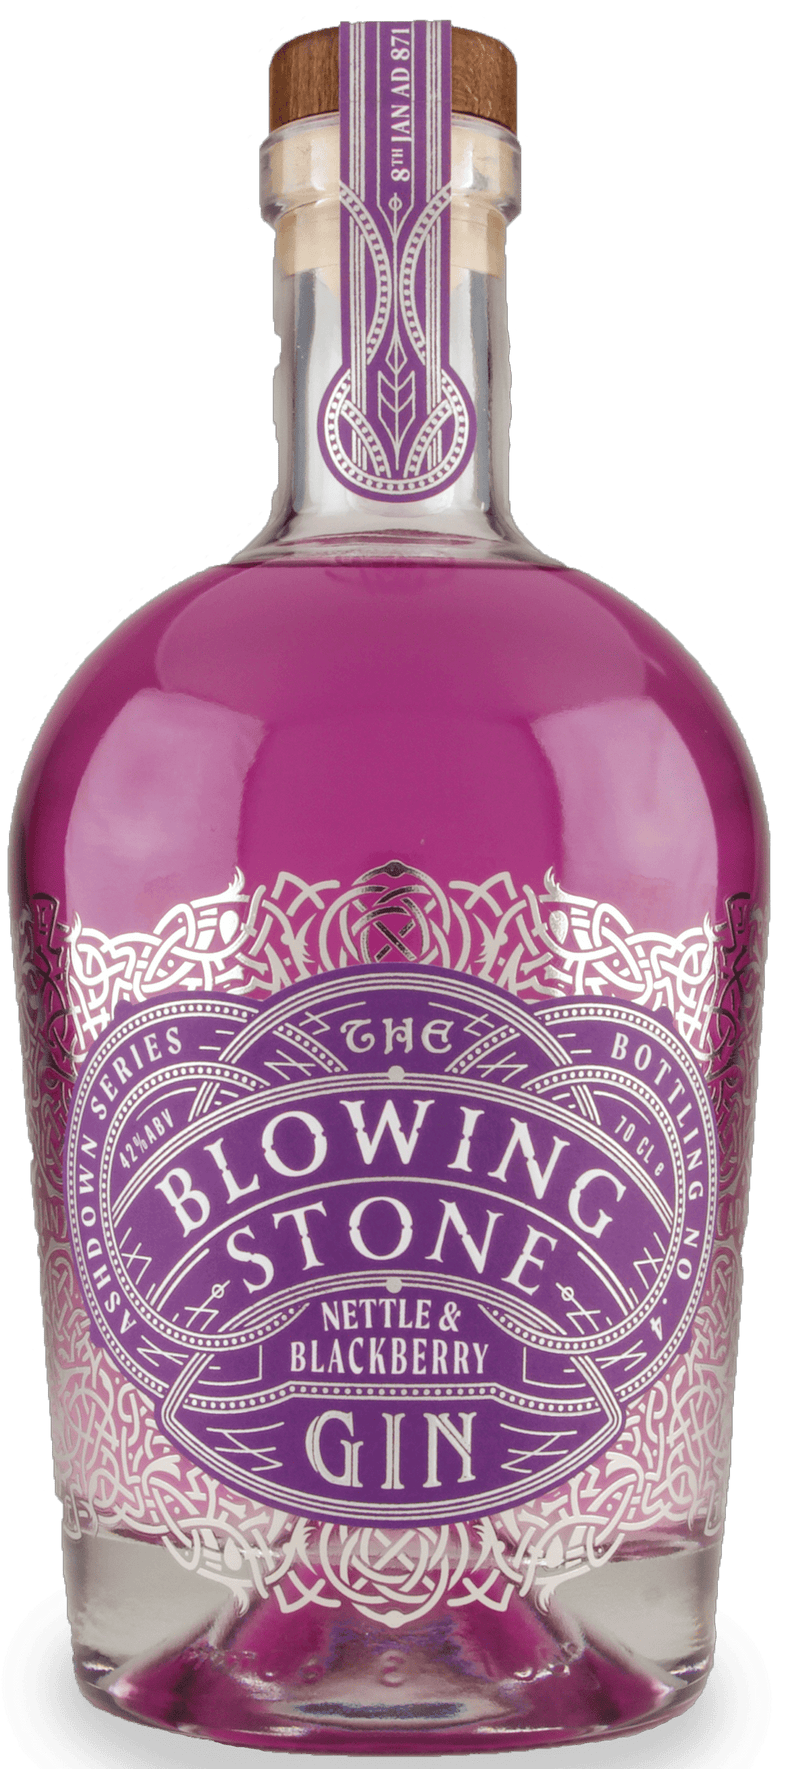 The Blowing Stone Nettle & Blackberry Gin 70cl